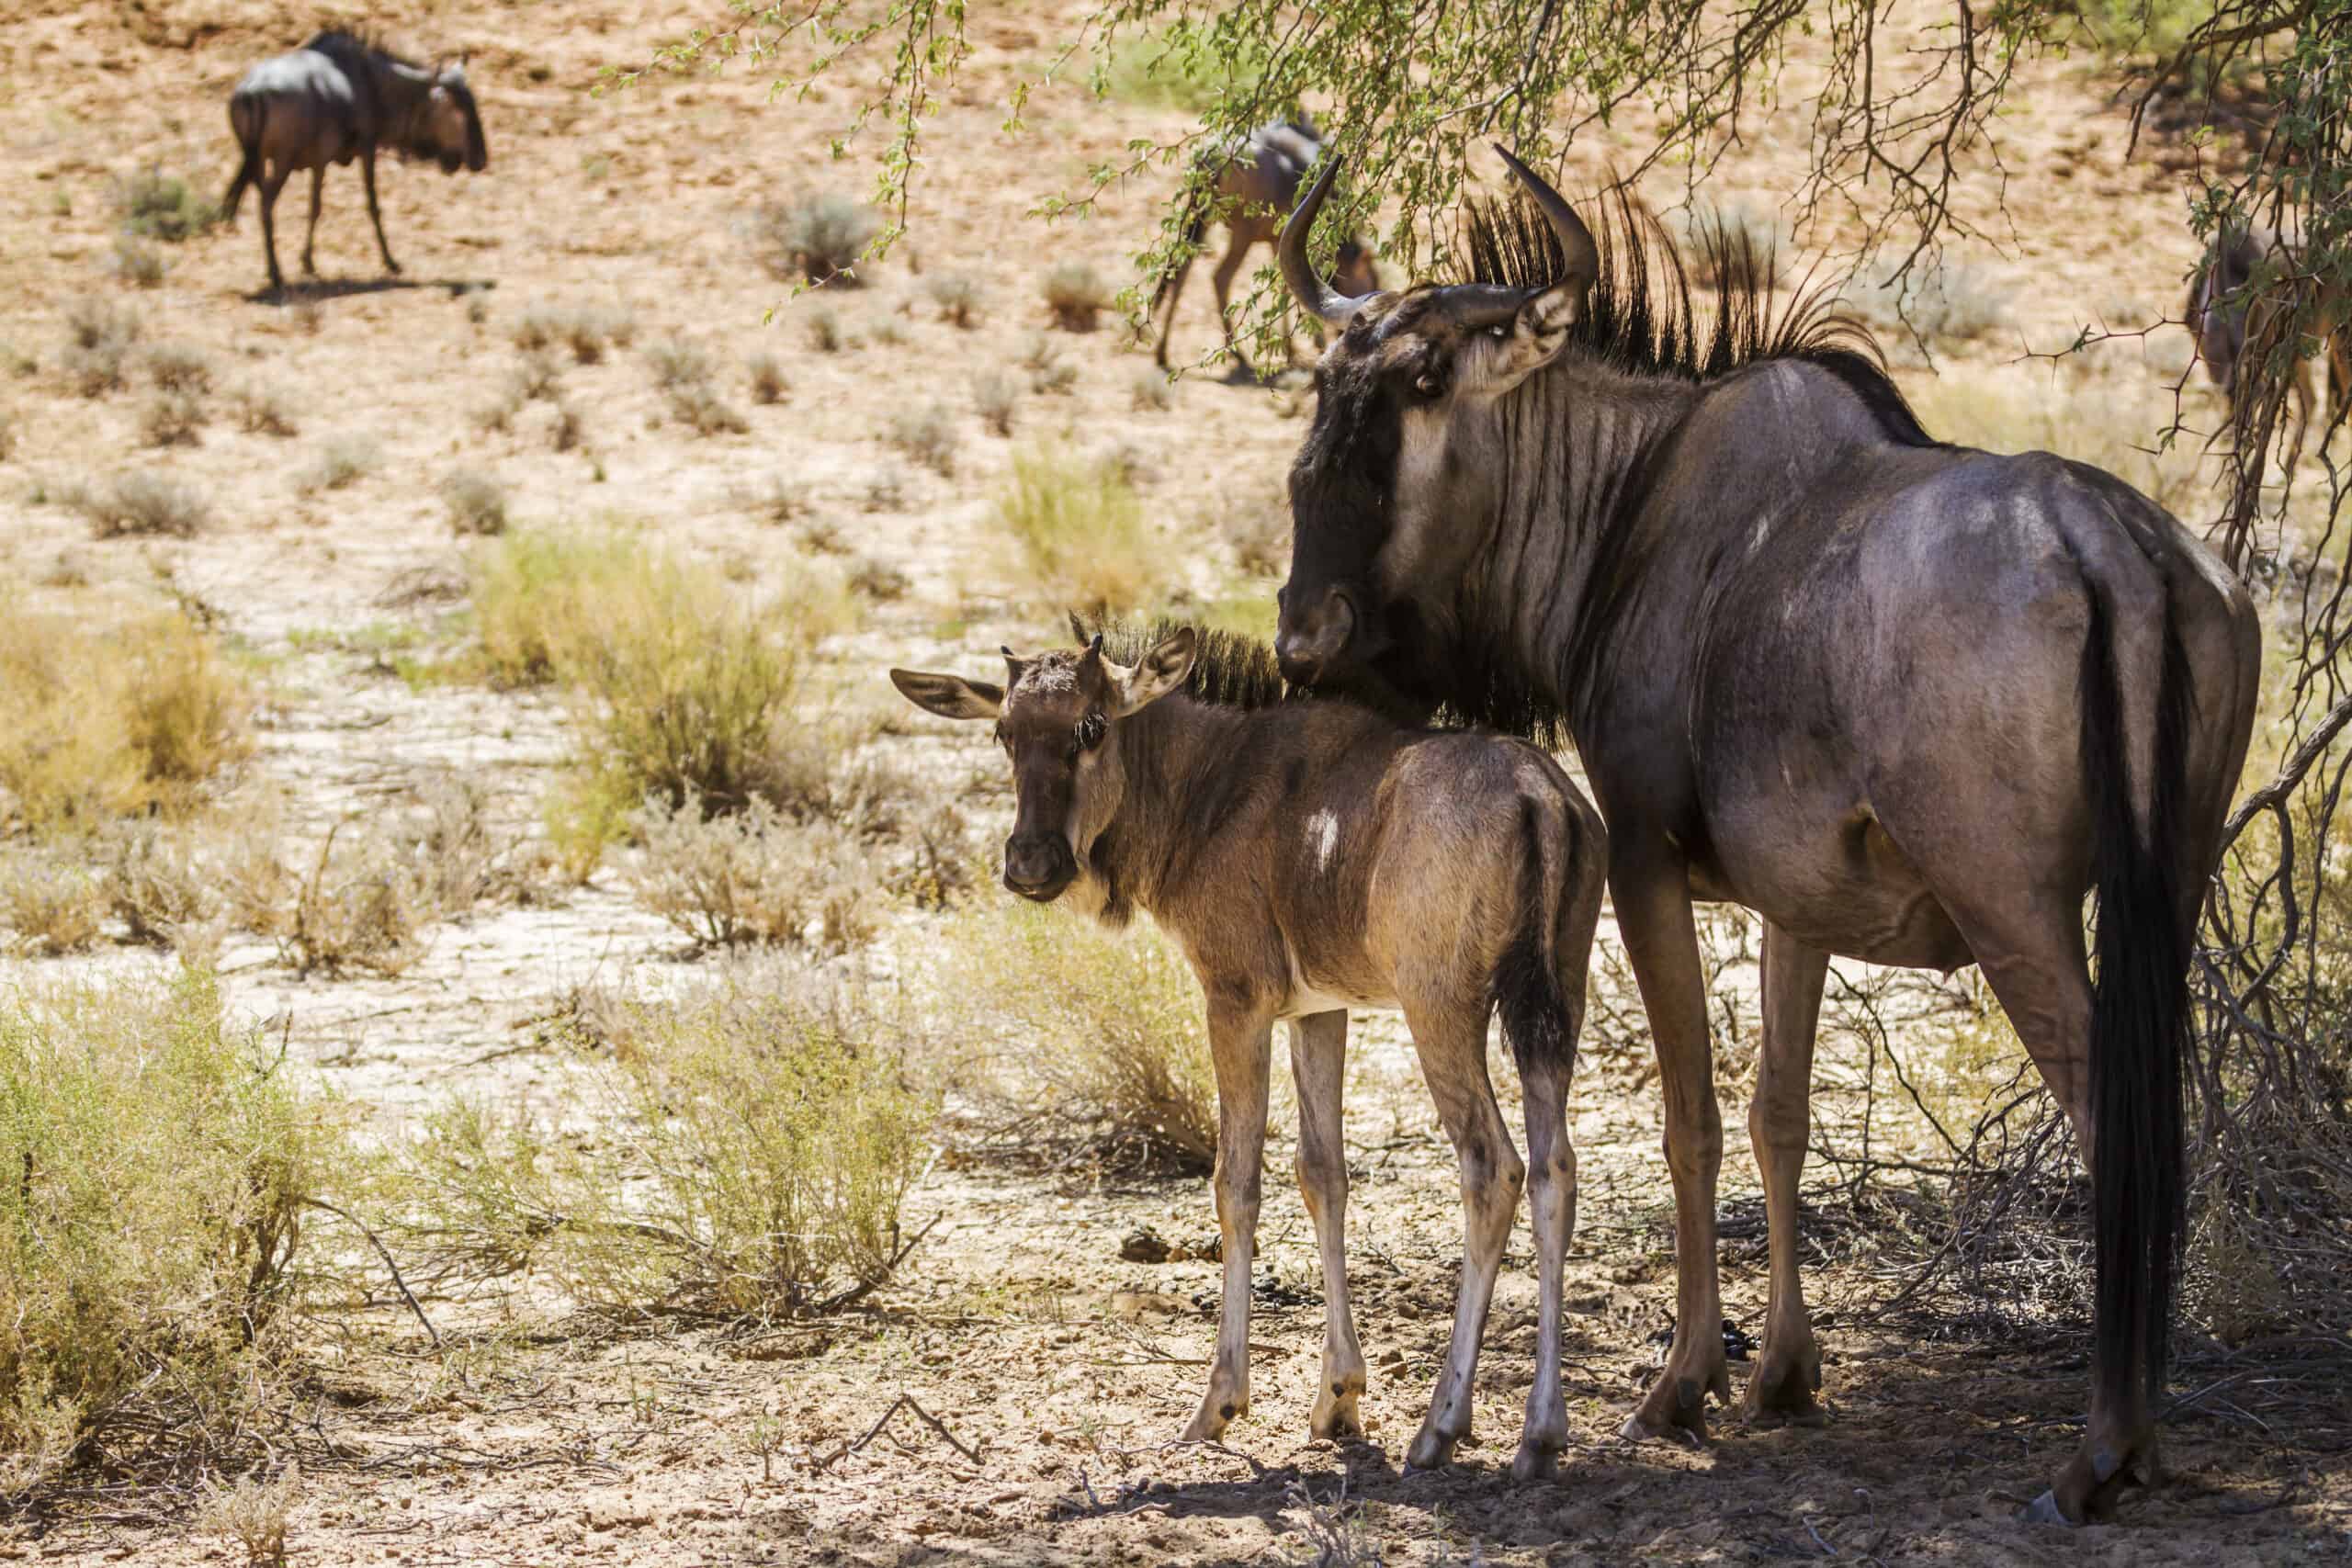 <p>The great wildebeest migration is one of Africa’s most spectacular <a class="wpil_keyword_link" href="https://www.animalsaroundtheglobe.com/wildlife-animals/" title="wildlife">wildlife</a> events. Over 1.5 million wildebeest, accompanied by zebras and gazelles, travel in a continuous loop between Tanzania’s Serengeti and Kenya’s Maasai Mara in search of fresh grazing lands. </p>           Sharks, lions, tigers, as well as all about cats & dogs!           <a href='https://www.msn.com/en-us/channel/source/Animals%20Around%20The%20Globe%20US/sr-vid-ryujycftmyx7d7tmb5trkya28raxe6r56iuty5739ky2rf5d5wws?ocid=anaheim-ntp-following&cvid=1ff21e393be1475a8b3dd9a83a86b8df&ei=10'>           Click here to get to the Animals Around The Globe profile page</a><b> and hit "Follow" to never miss out.</b>